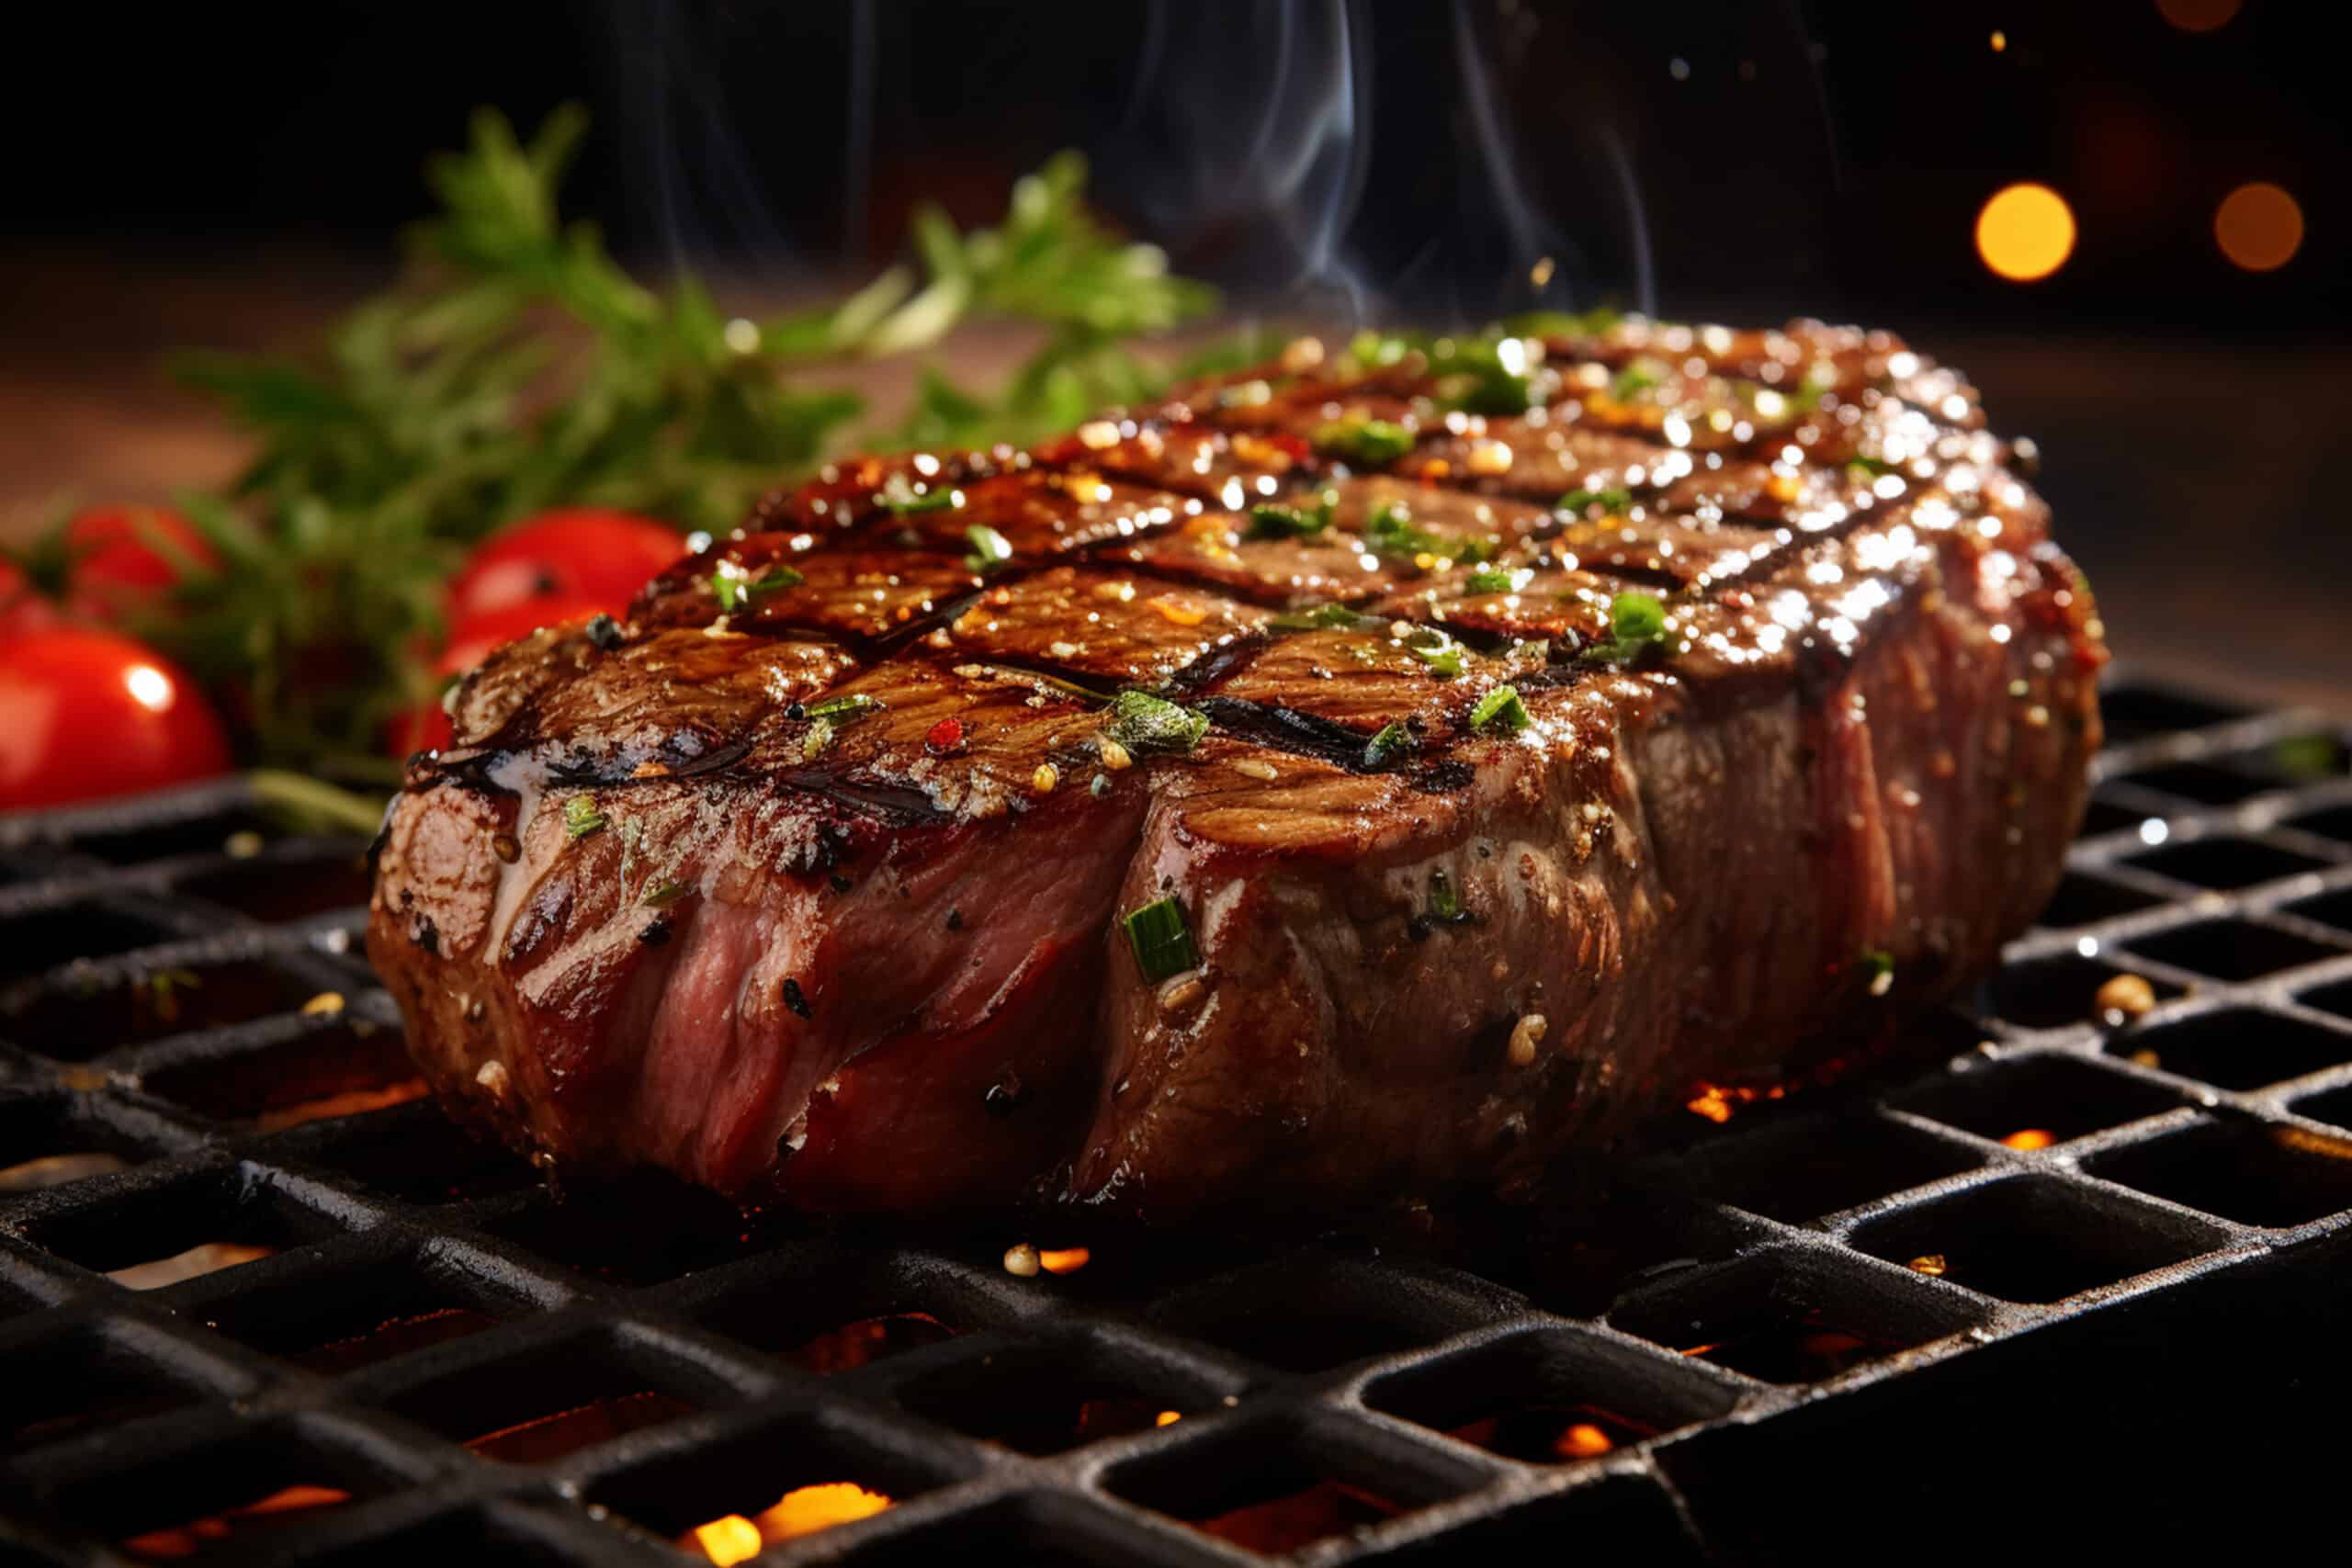 www.appr.com : How To Grill London Broil On Gas Grill?